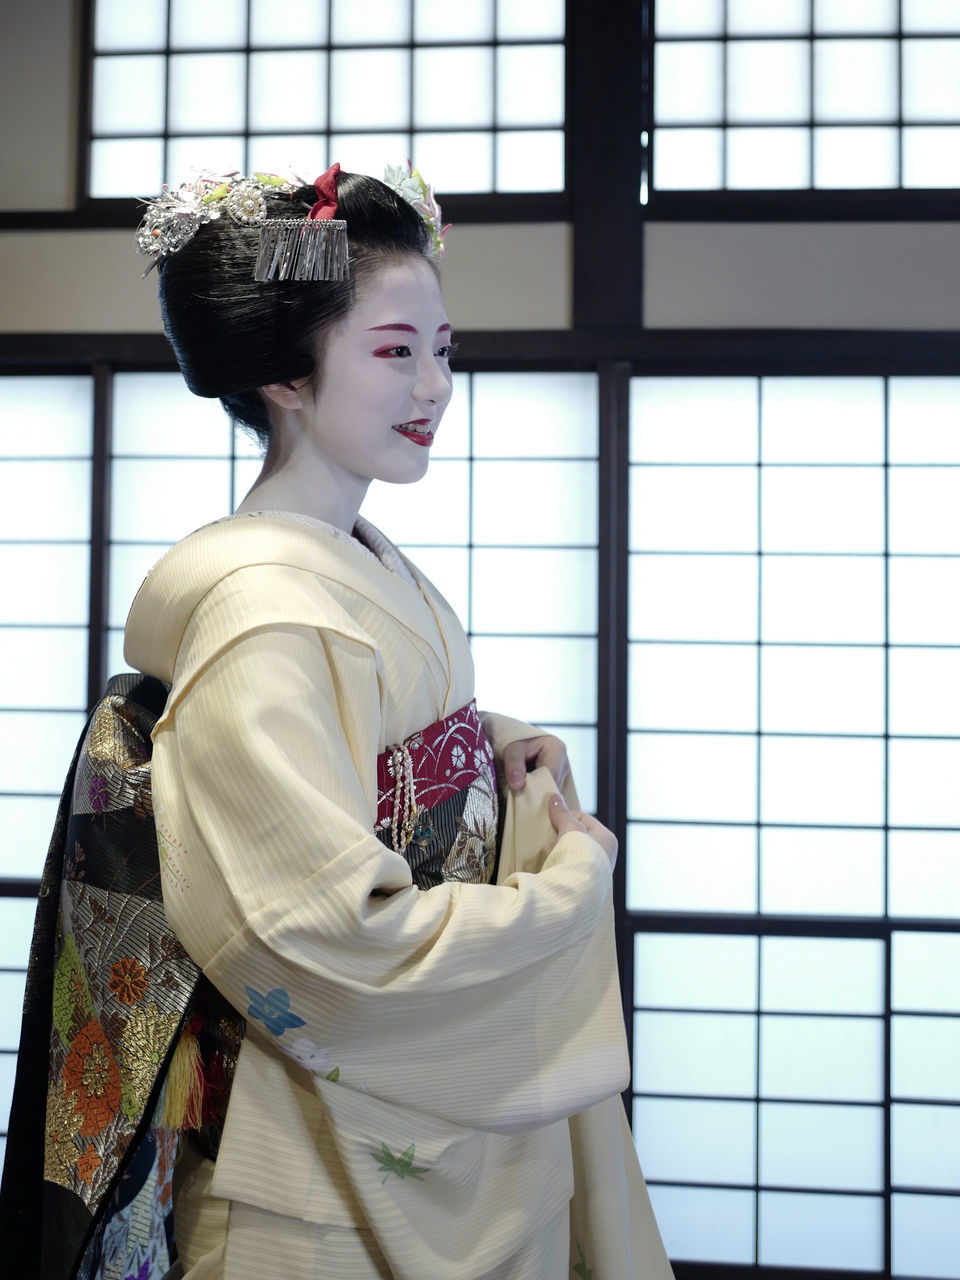 kimono, female, culture, women, costume, adult, traditional clothing, one person, robe, indoors, clothing, window, person, young adult, fashion, elegance, architecture, lifestyles, tradition, history, nature, looking, the past, ceremony, side view, portrait, hair bun, bun